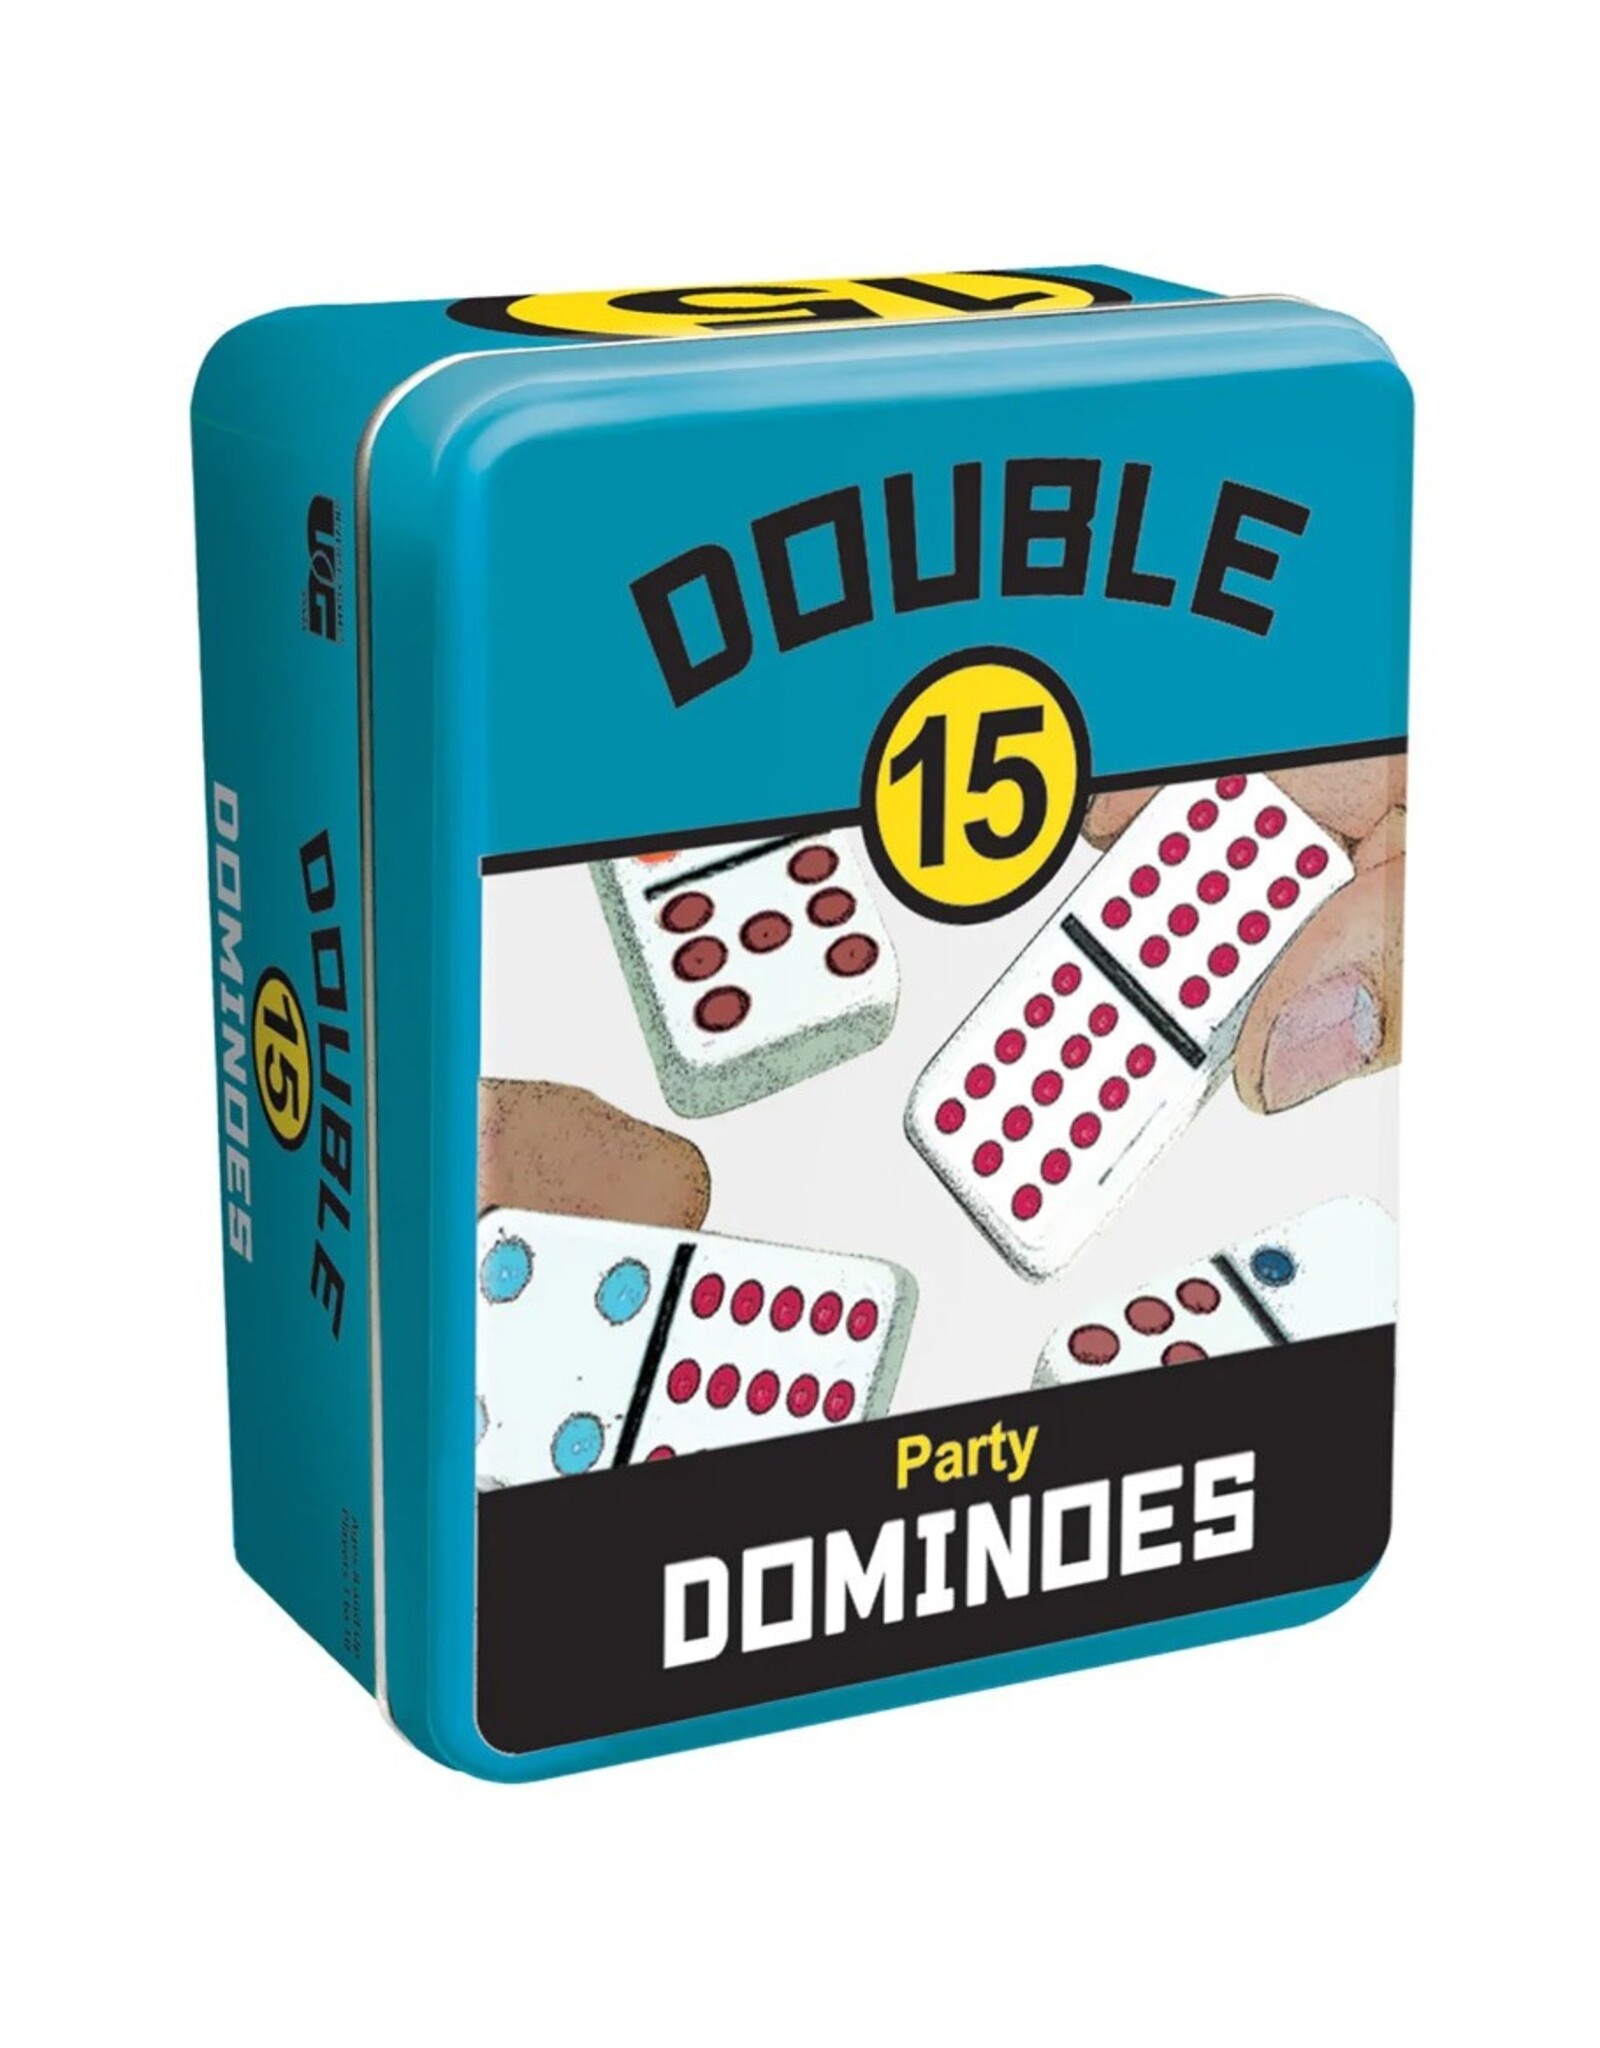 University Games Dominoes: Double 15 Party